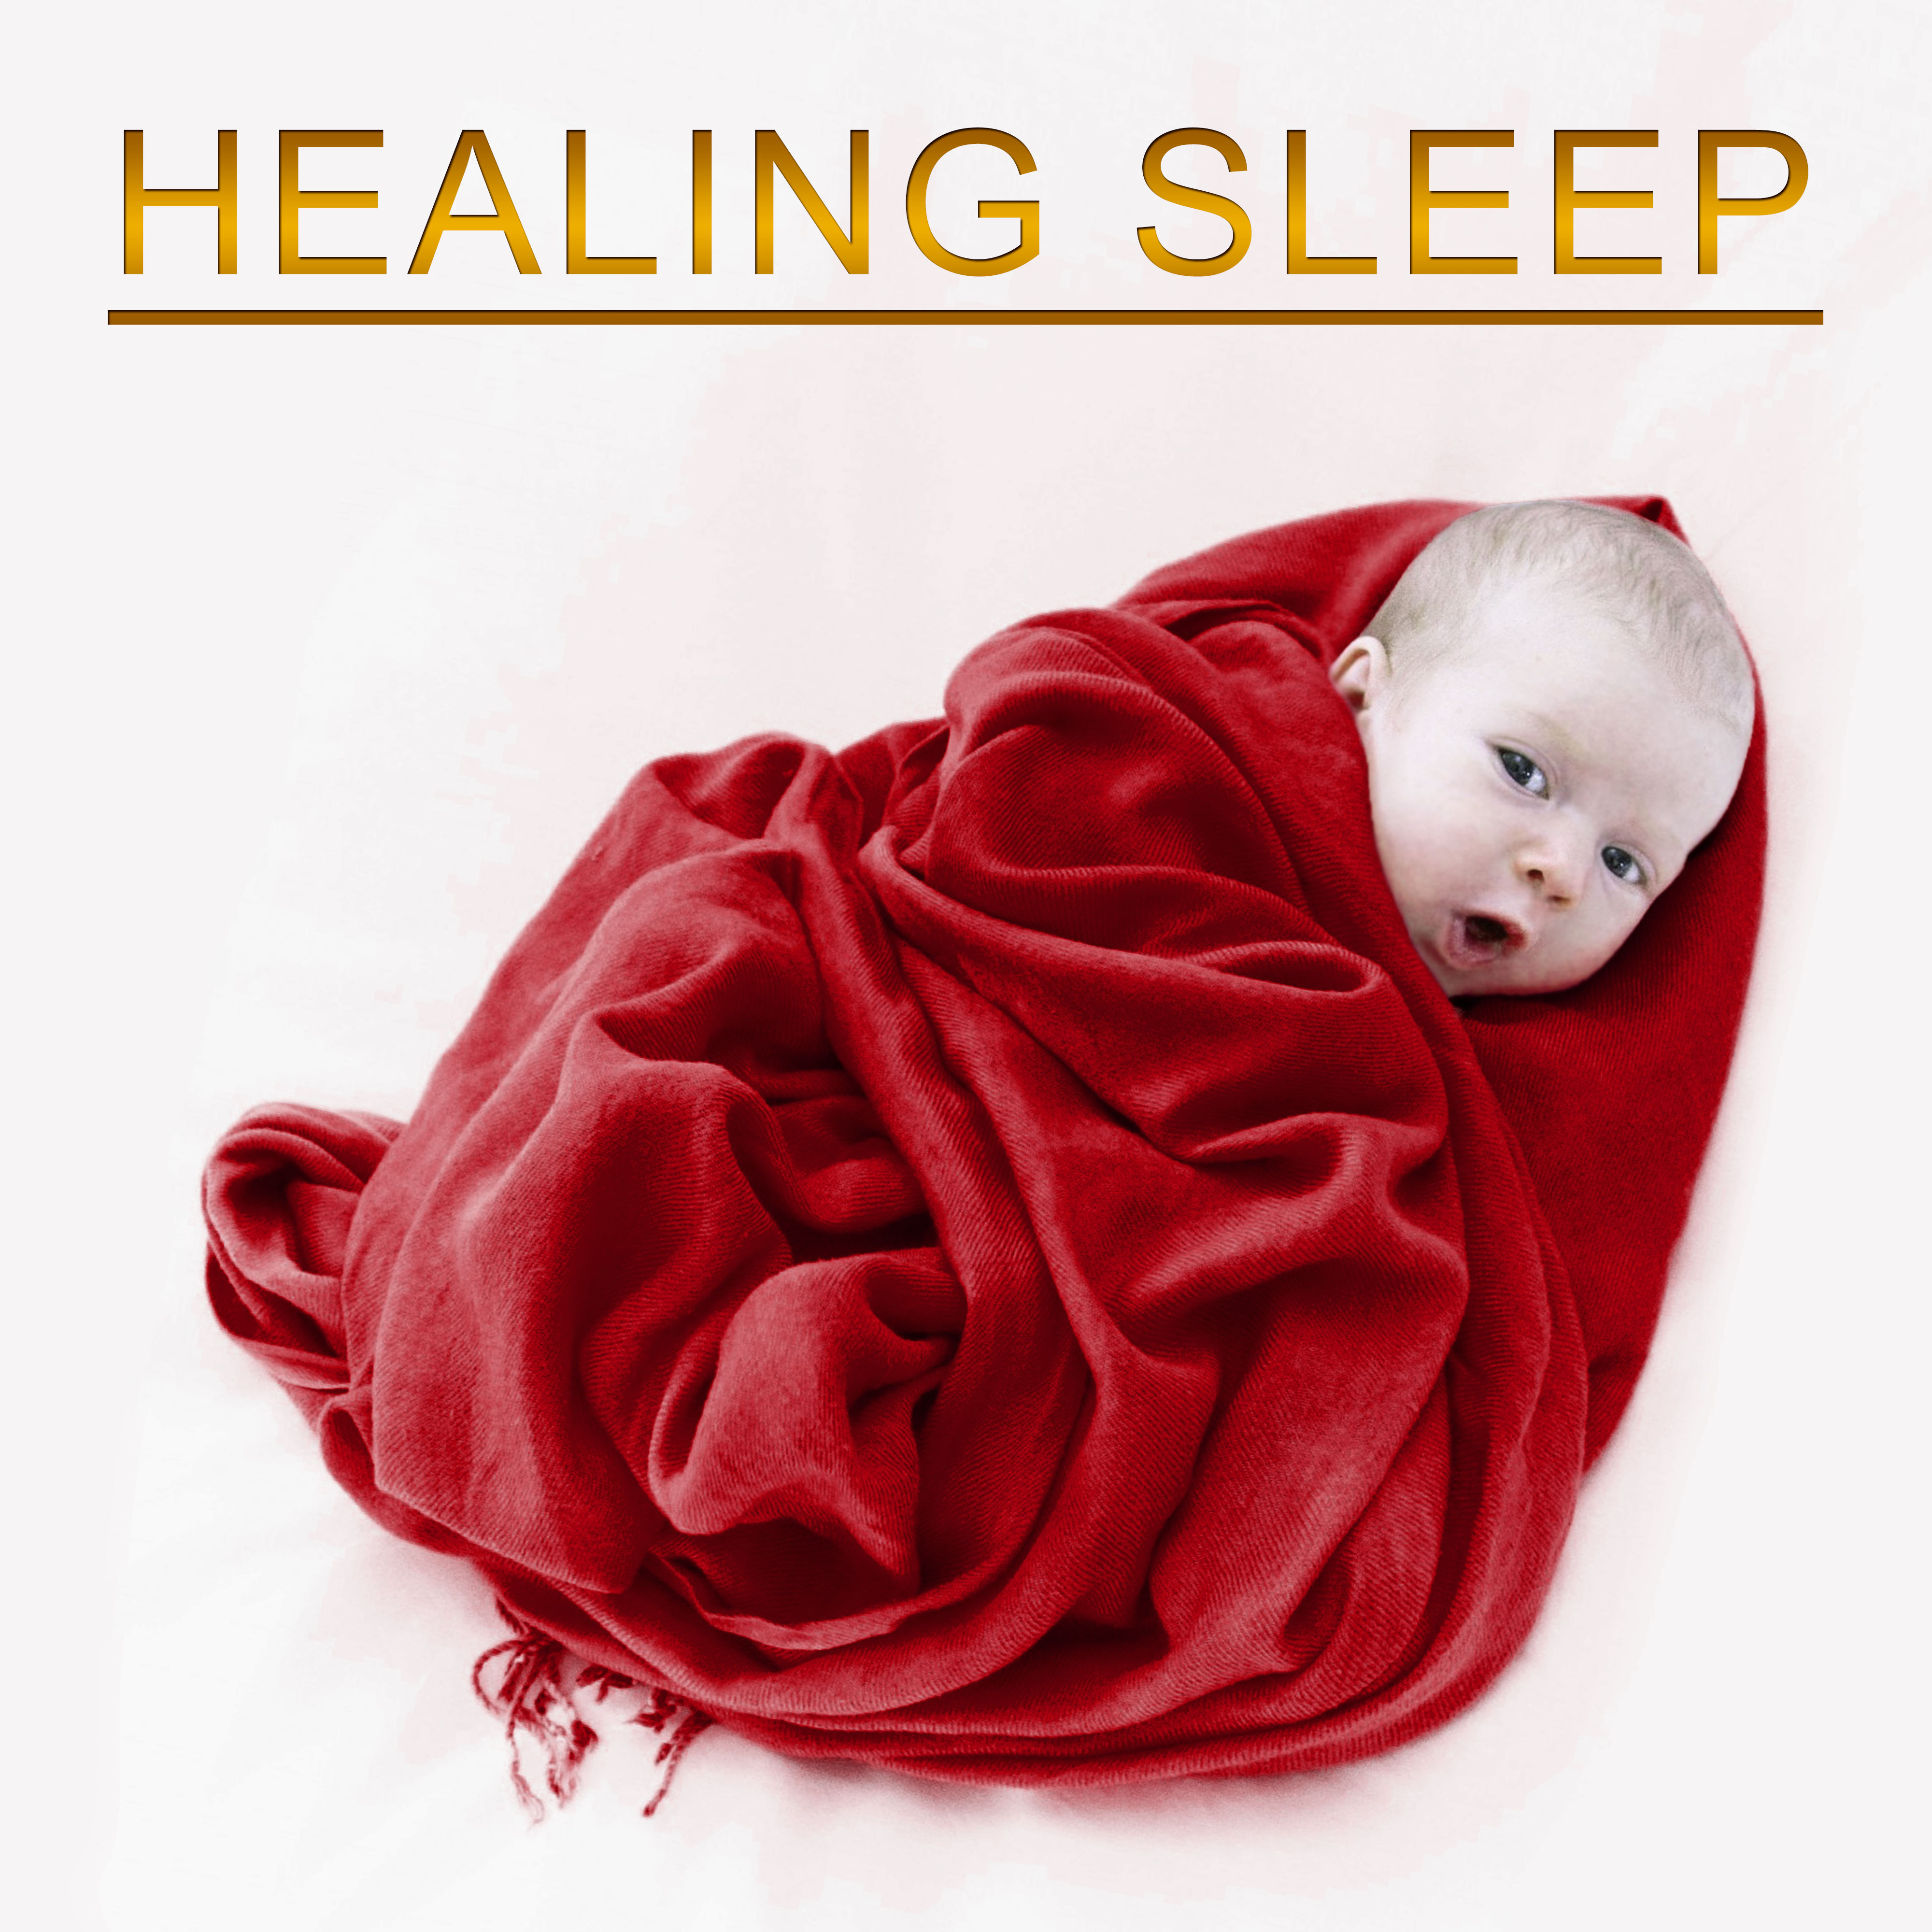 Healing Sleep – Rest for a While, Soft New Age for Baby, Calming Sleep, Dreaming Time